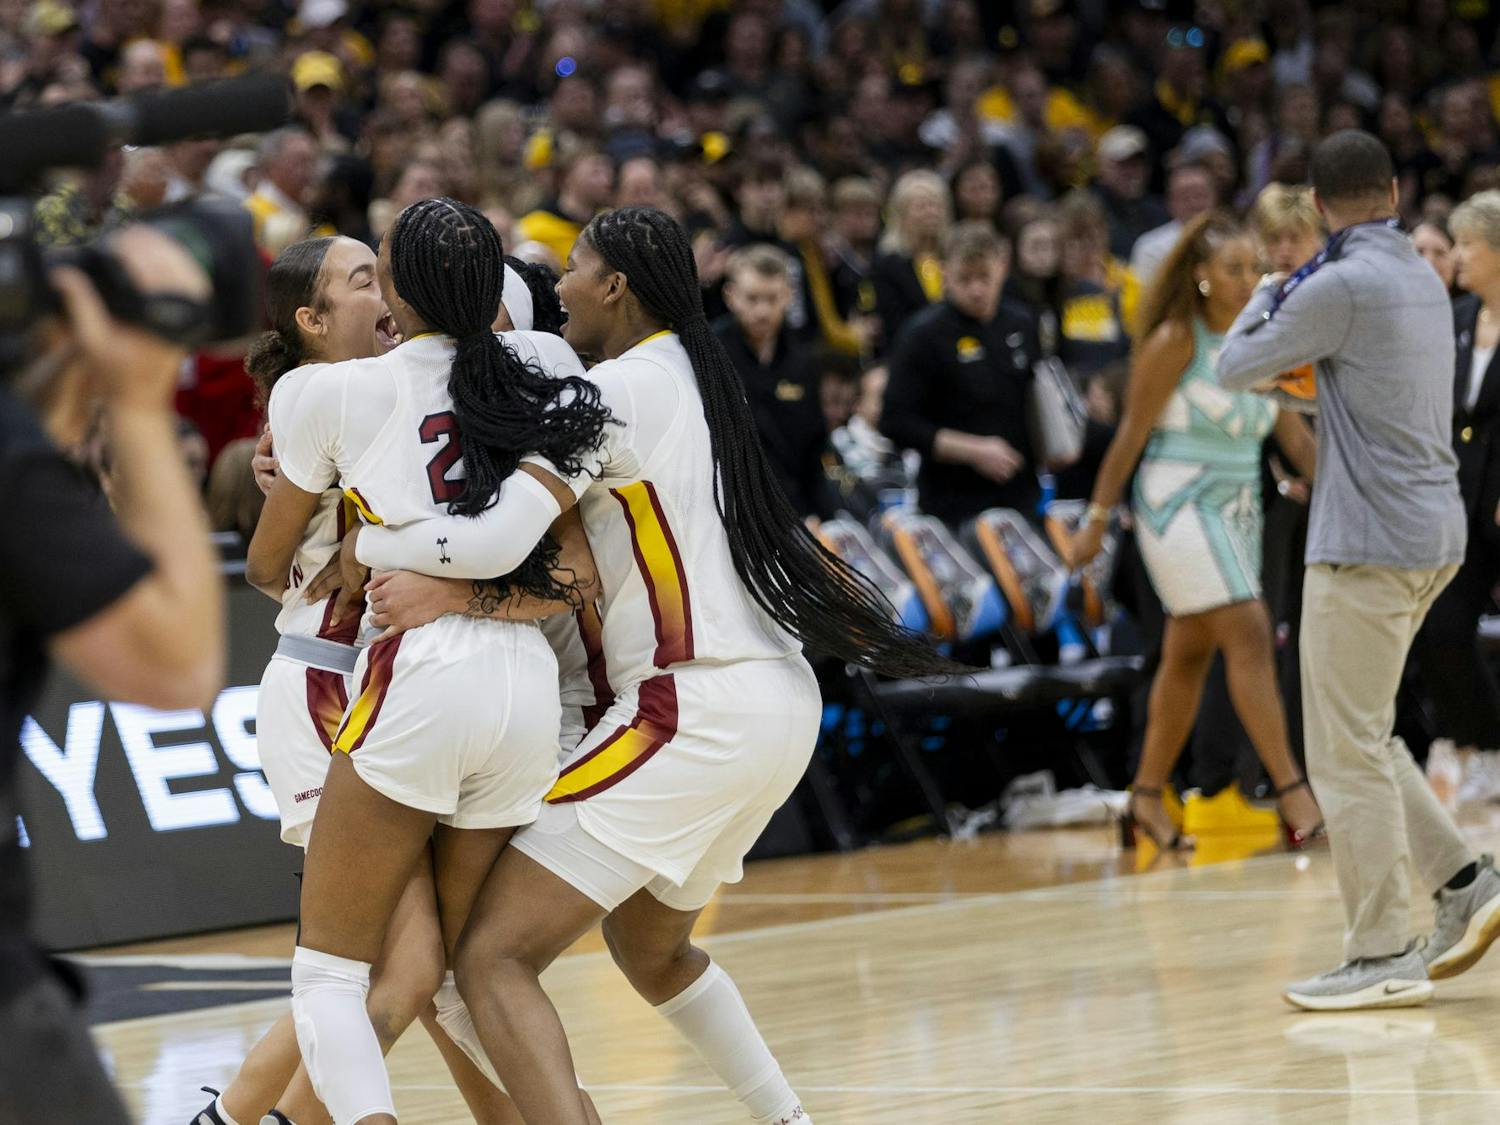 Freshman guard Tessa Johnson, junior guard Bree Hall, senior center Sakima Walker and senior guard Te-Hina Paopao hug in celebration after winning the national championship game. The Gamecocks completed a perfect, undefeated season ending in a national title for the first time in program history.